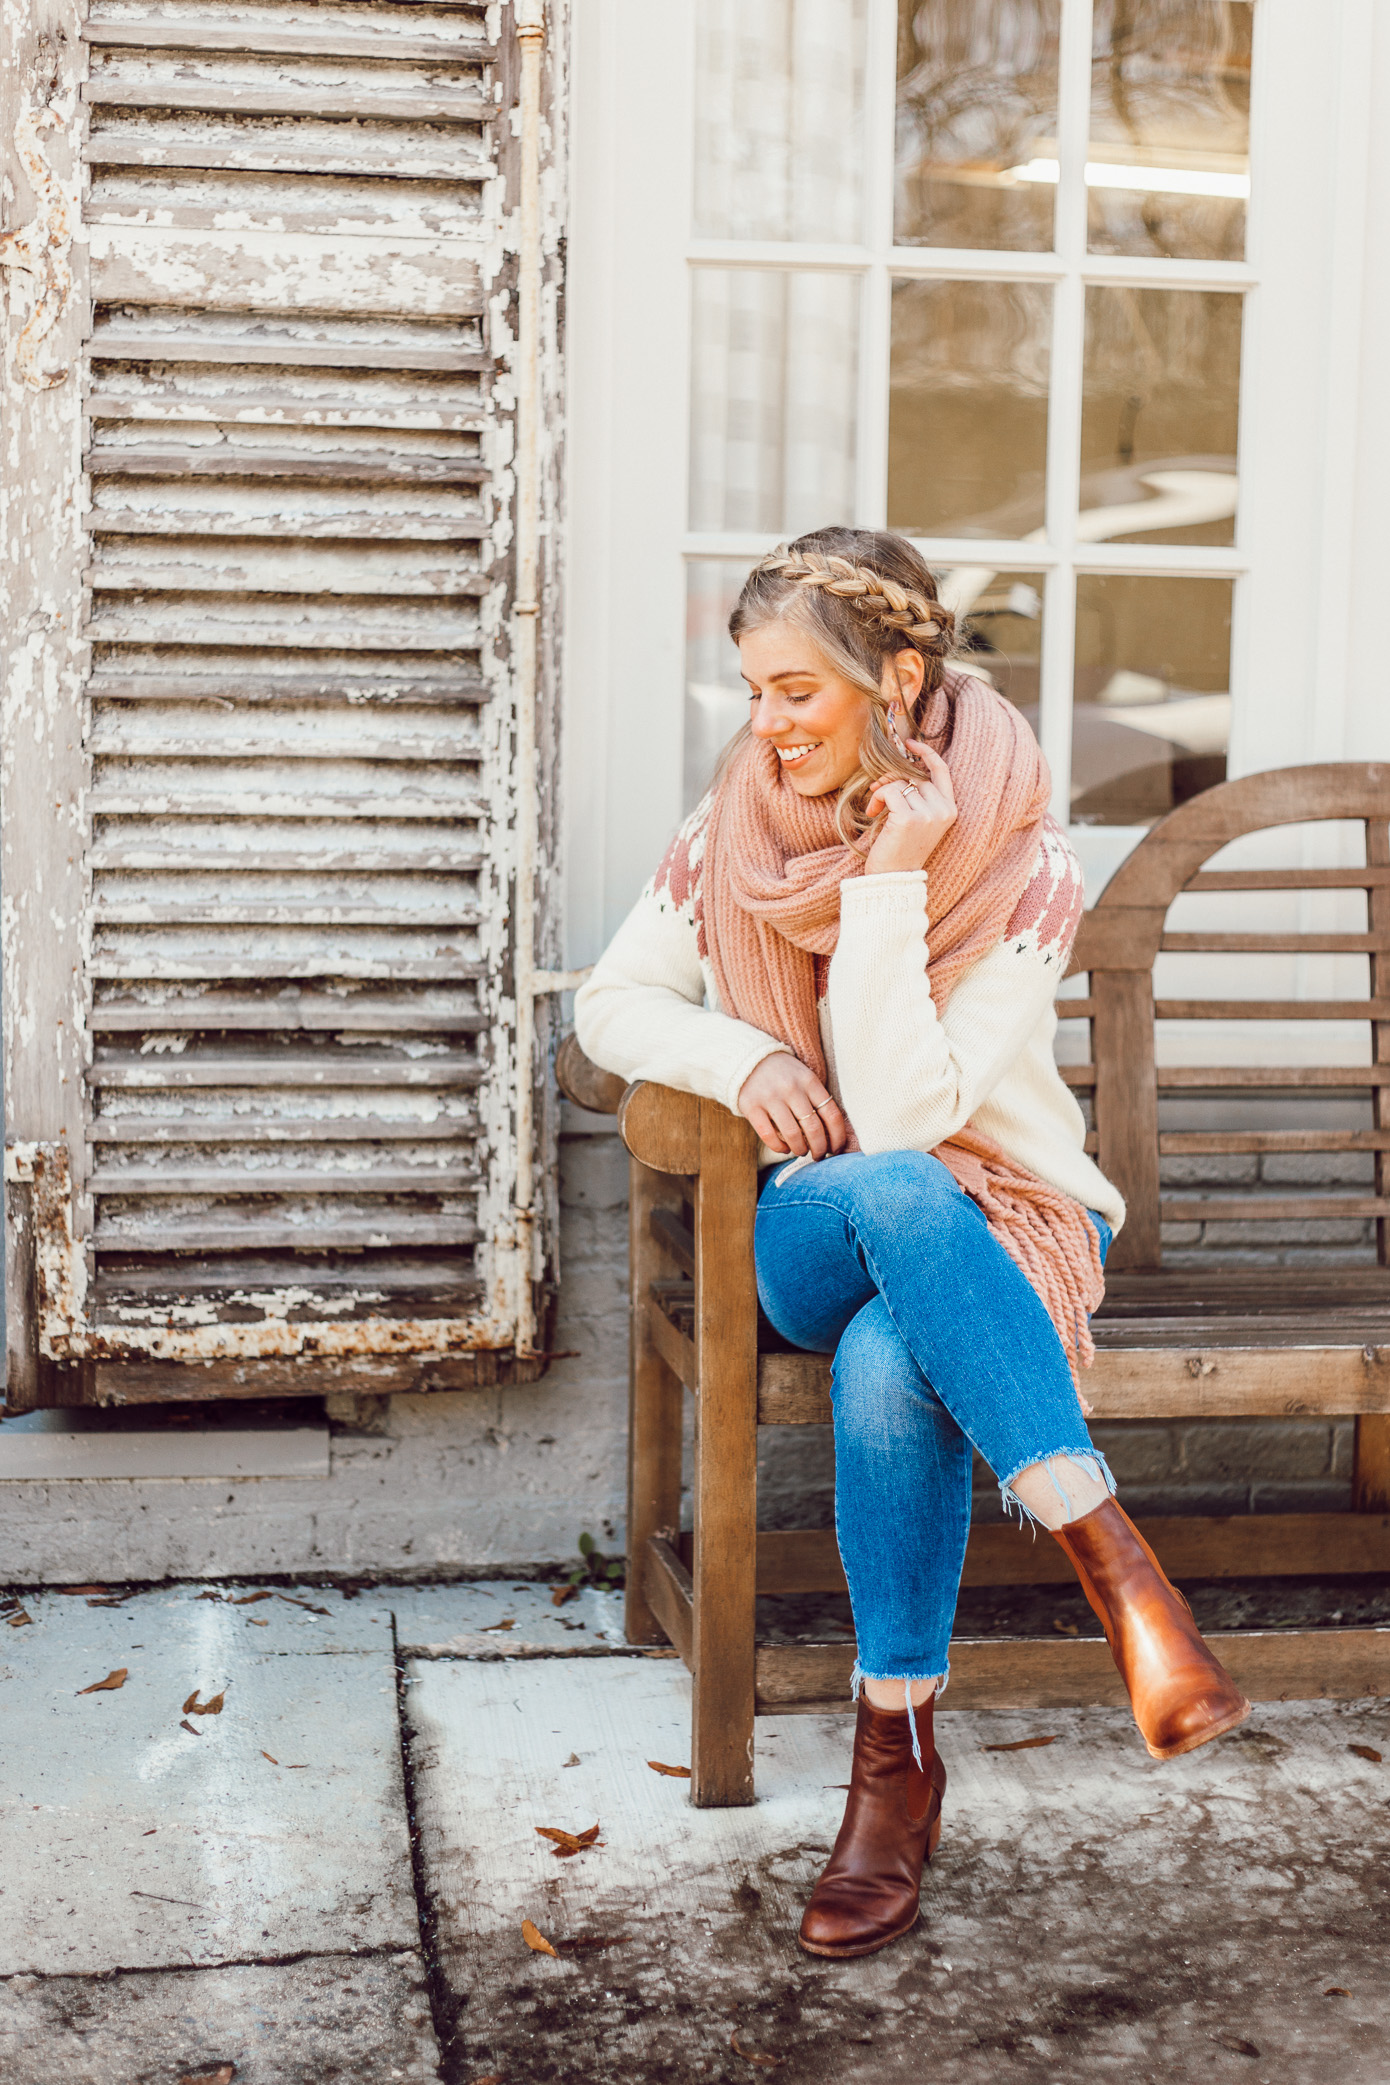 Madewell Keaton Fair Isle Sweater | 10 Things I Want to Make Happen In 2019, 2019 Goals | Louella Reese